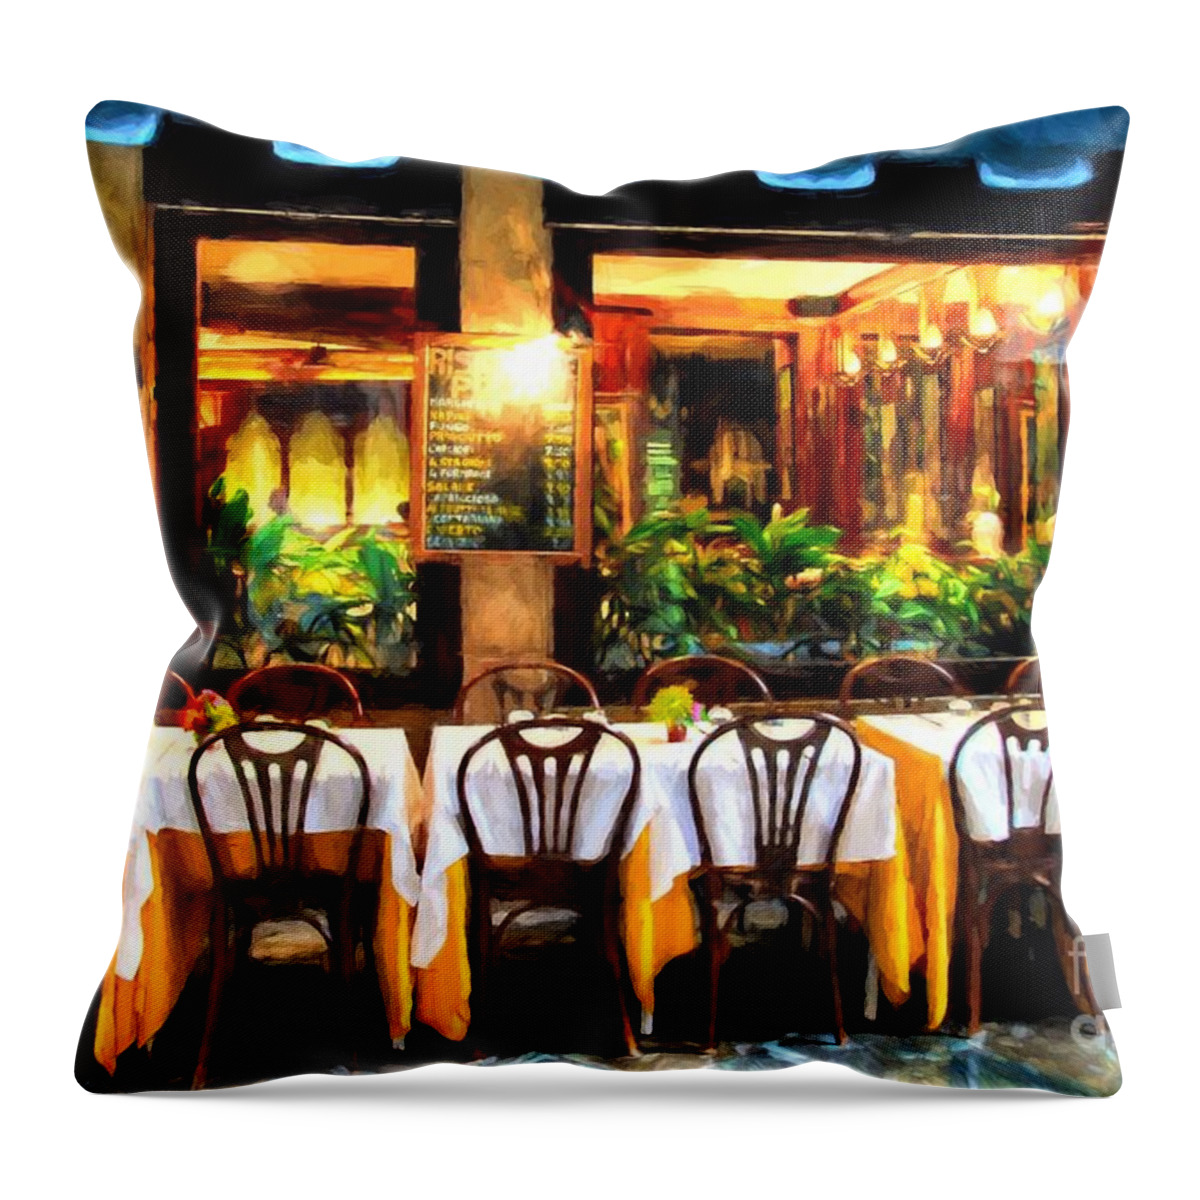 Ristorante In Venice Throw Pillow featuring the photograph Ristorante In Venice # 2 by Mel Steinhauer